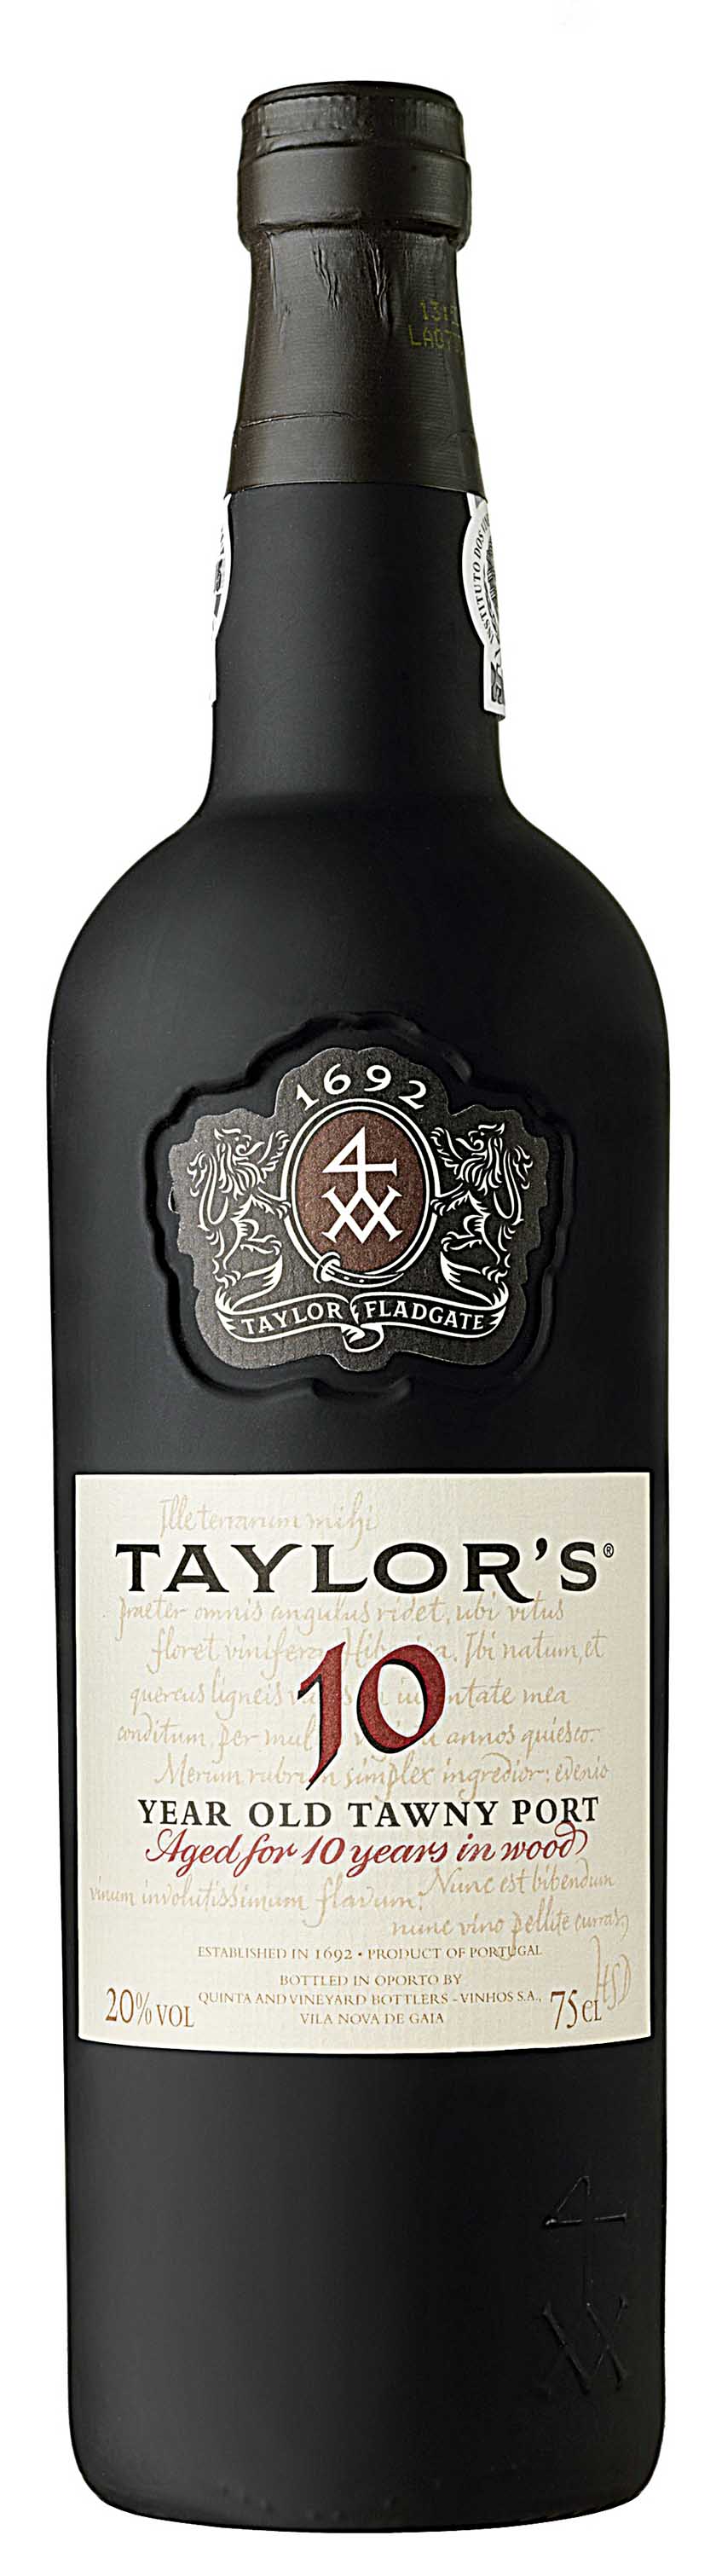 Taylor's 10 Year Old Tawny, £22